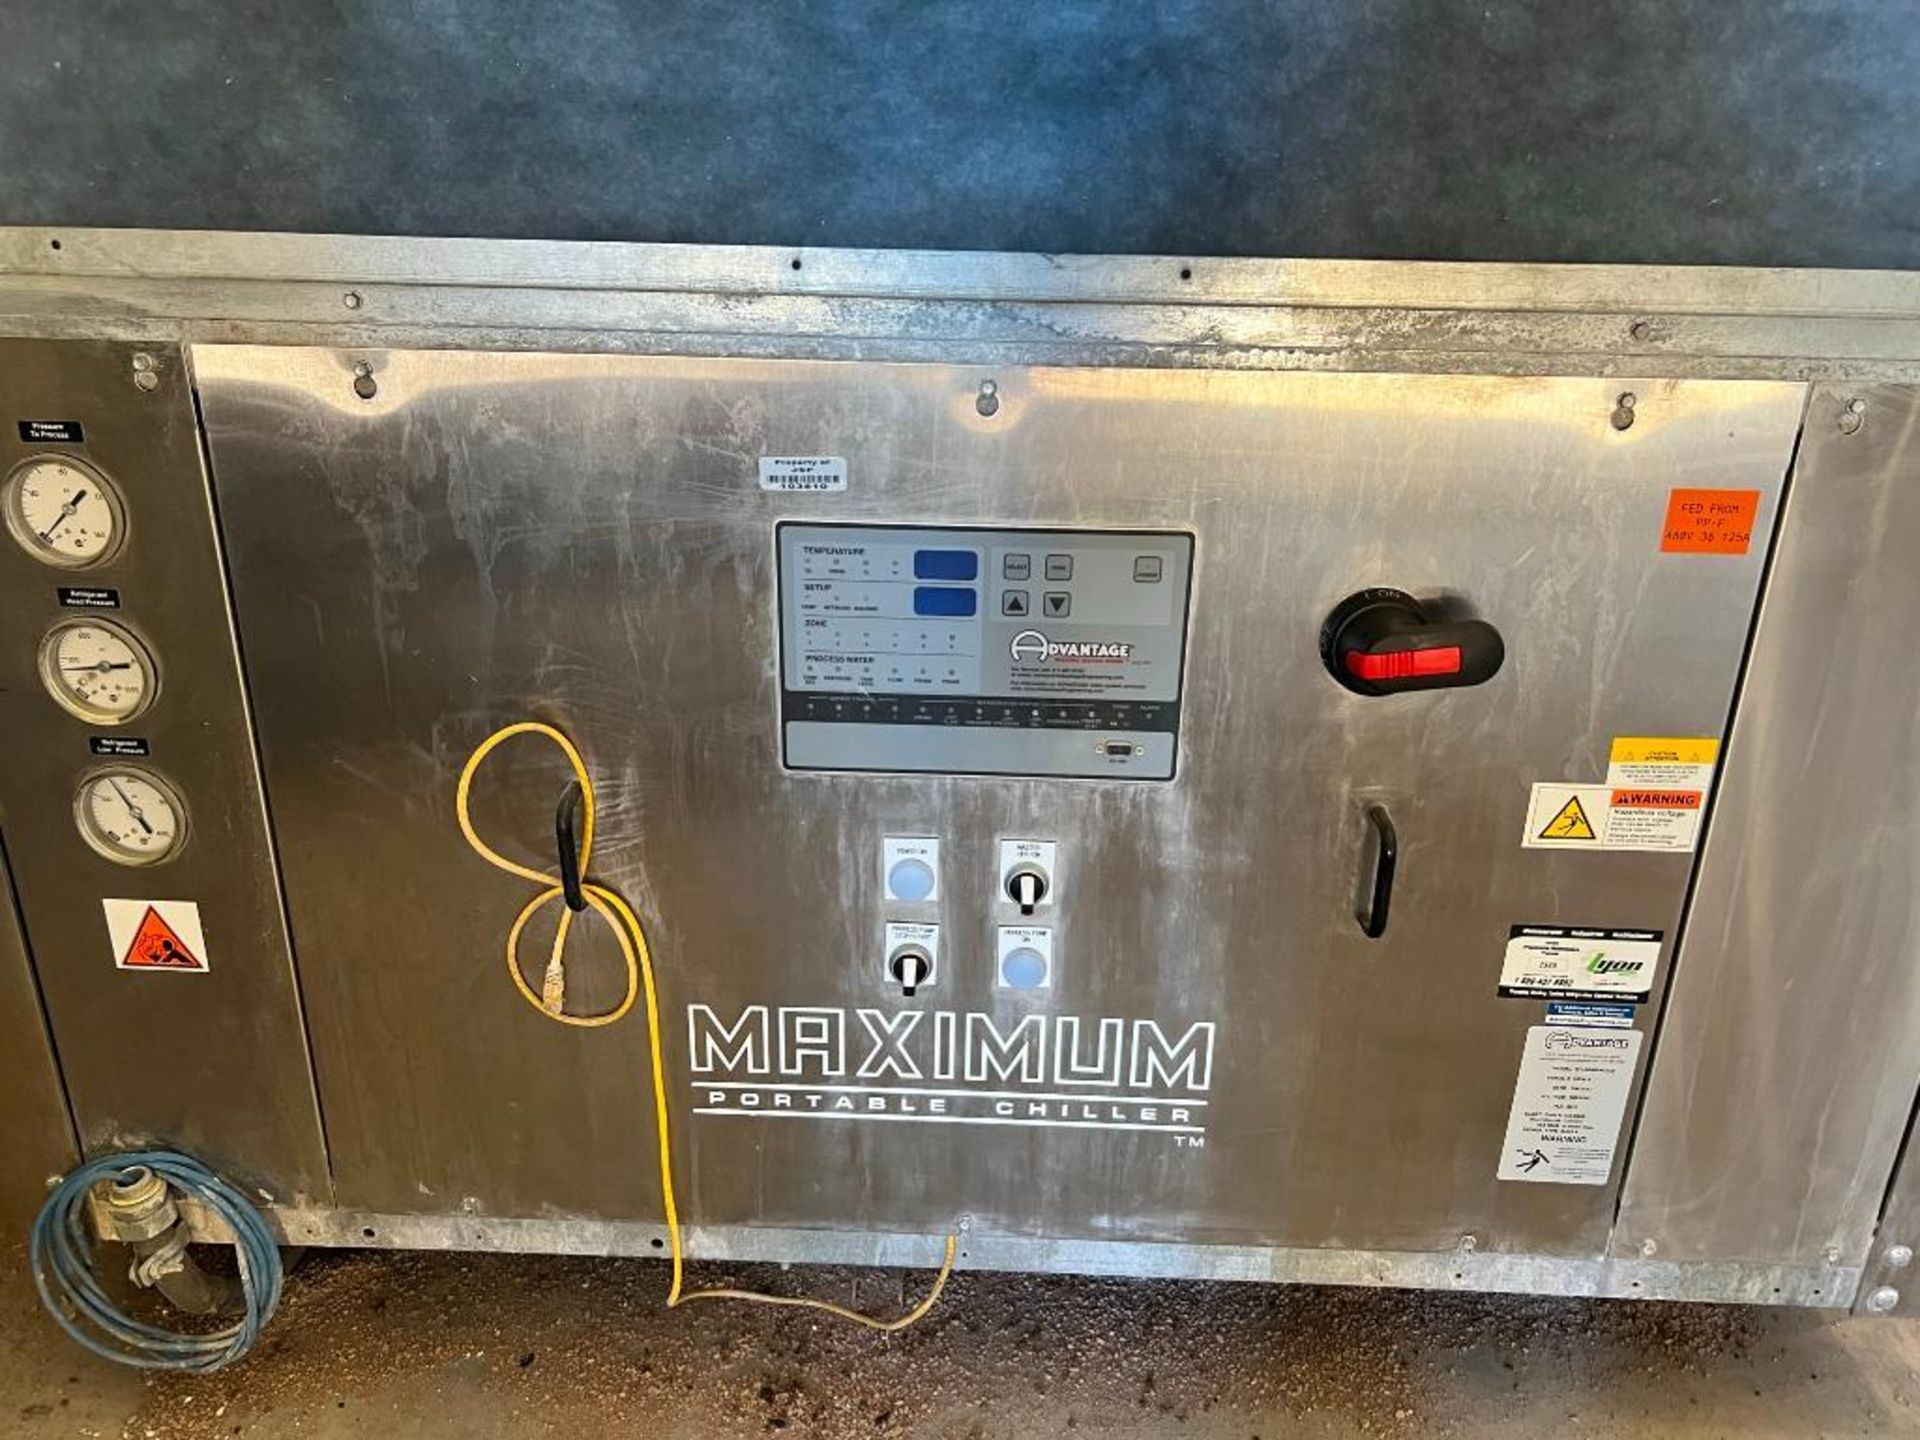 Advantage 30-Ton Maximum Series Portable Chiller Model M1-30AB-MZCD, S/N 153415 (2018), with Spare F - Image 4 of 8